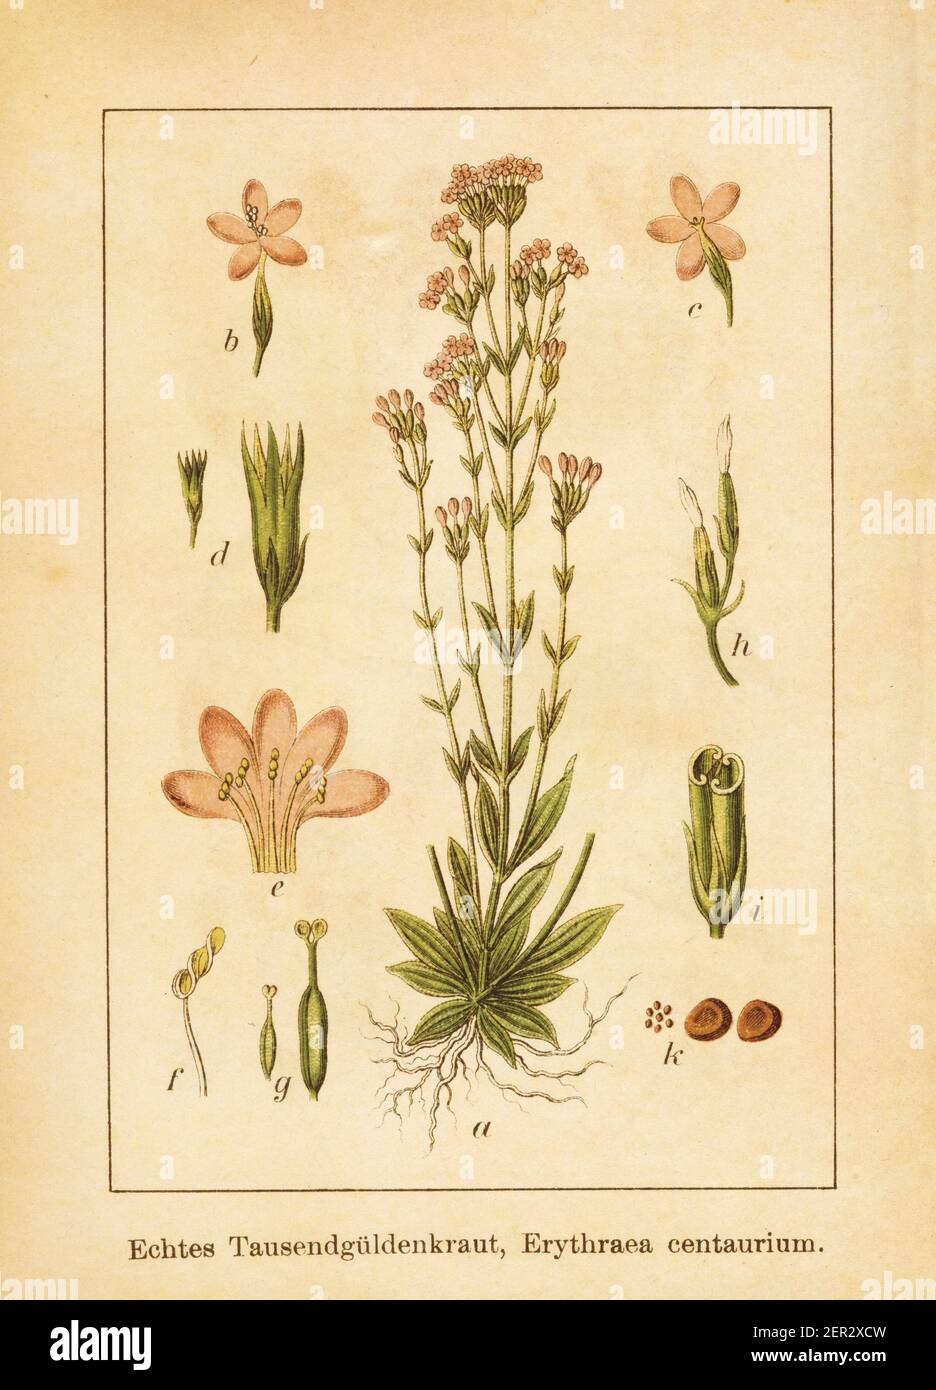 Antique illustration of a centaurium erythraea, also known as European centaury or common centaury. Engraved by Jacob Sturm (1771-1848) and published Stock Photo